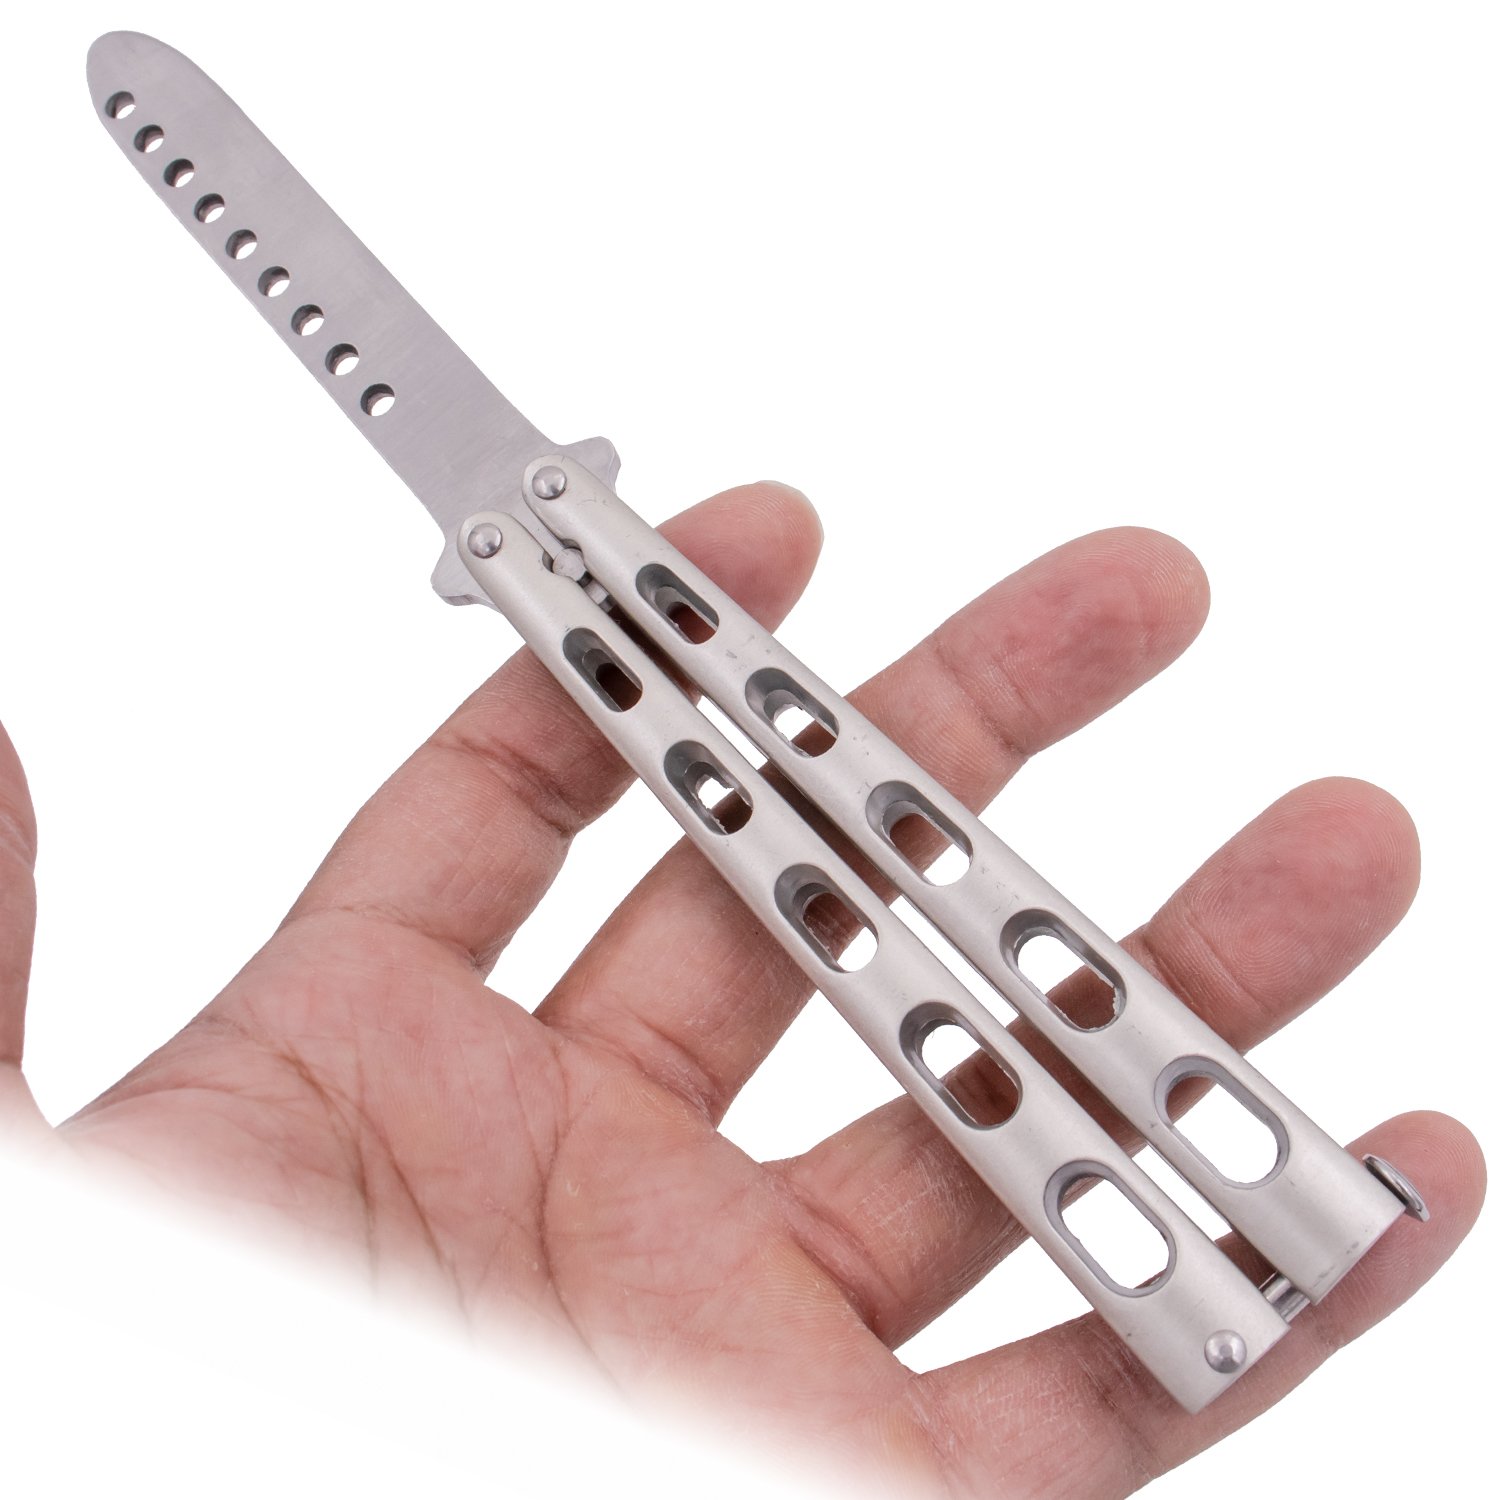 Tiger USA Butterfly Training Knife 440 Stainless 8.85 Inch   Silver Picture 2